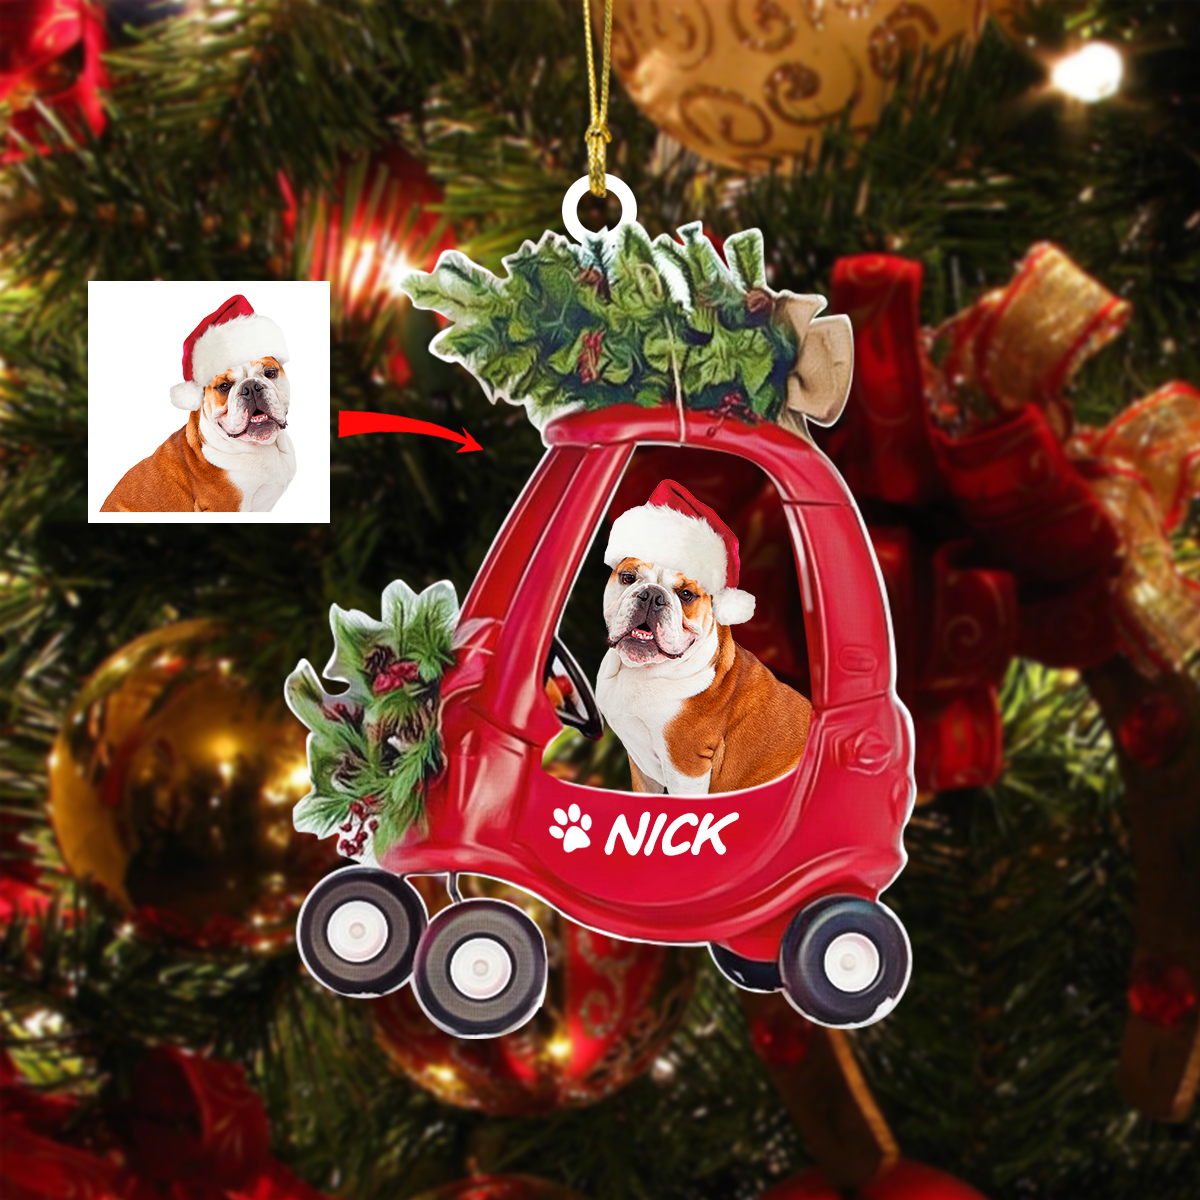 Personalized Dog Ornaments - Custom Dog Christmas Ornaments - The Dog Is In The Car